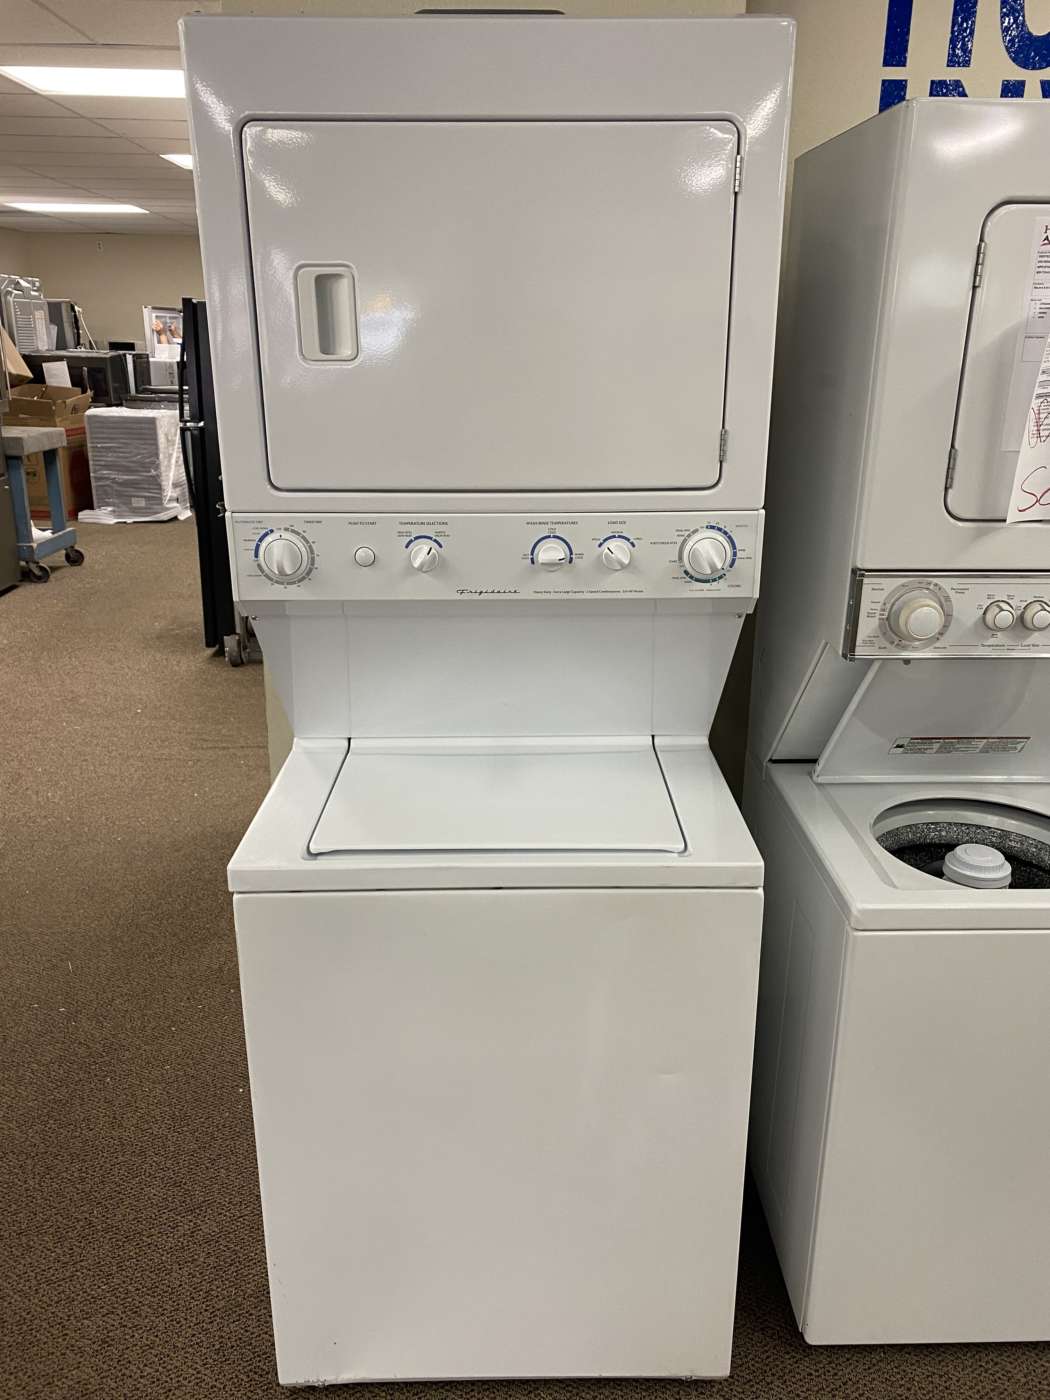 Reconditioned FRIGIDAIRE 27″ Laundry-Center / 2.7 Cu. Ft. Top-Load Washer & 5.7 Cu. Ft. Electric Dryer – White